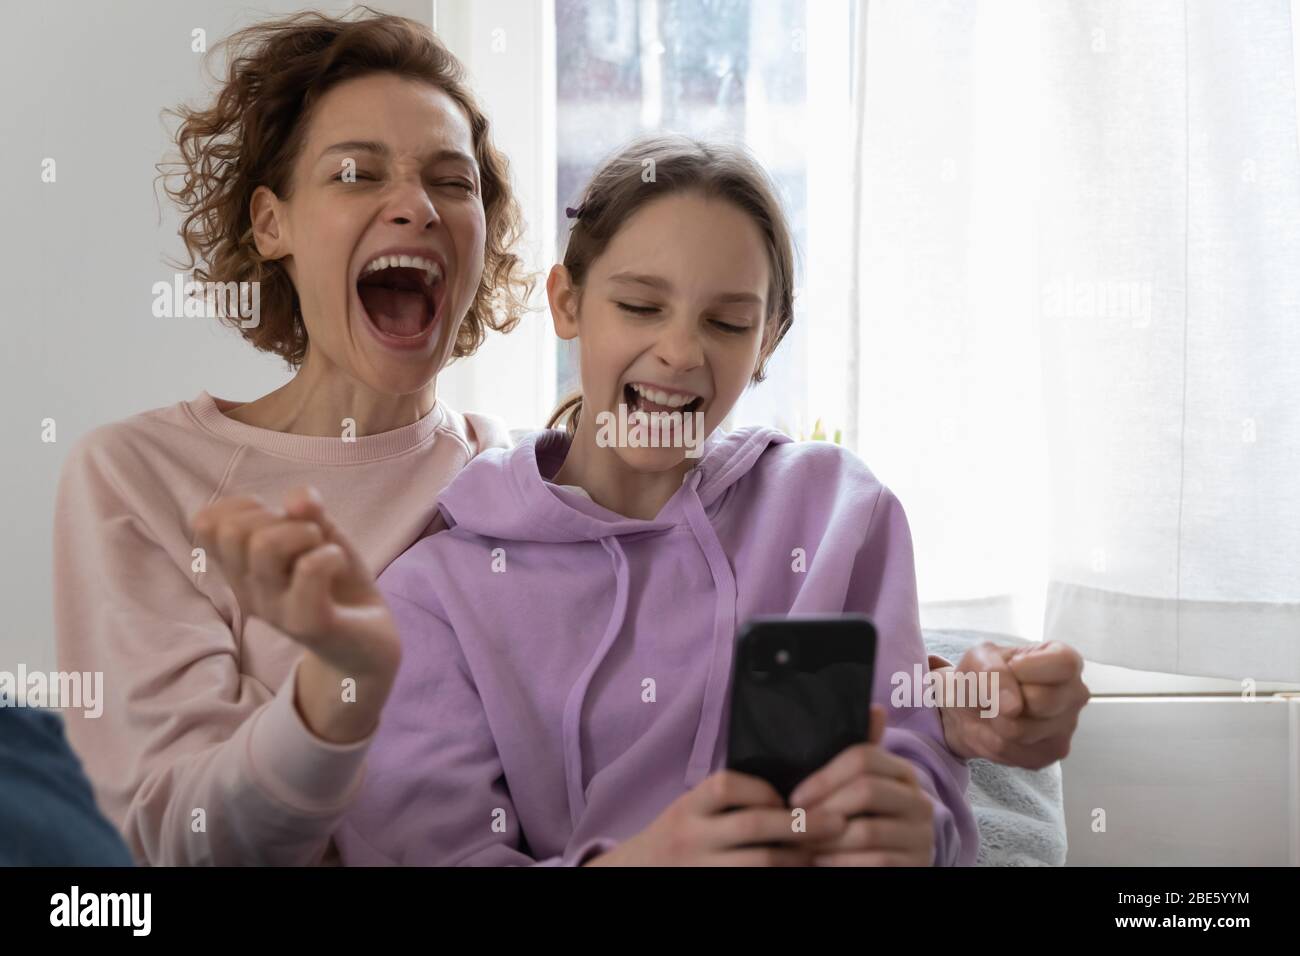 Excited mom and teenage girl daughter winning using smartphone Stock Photo